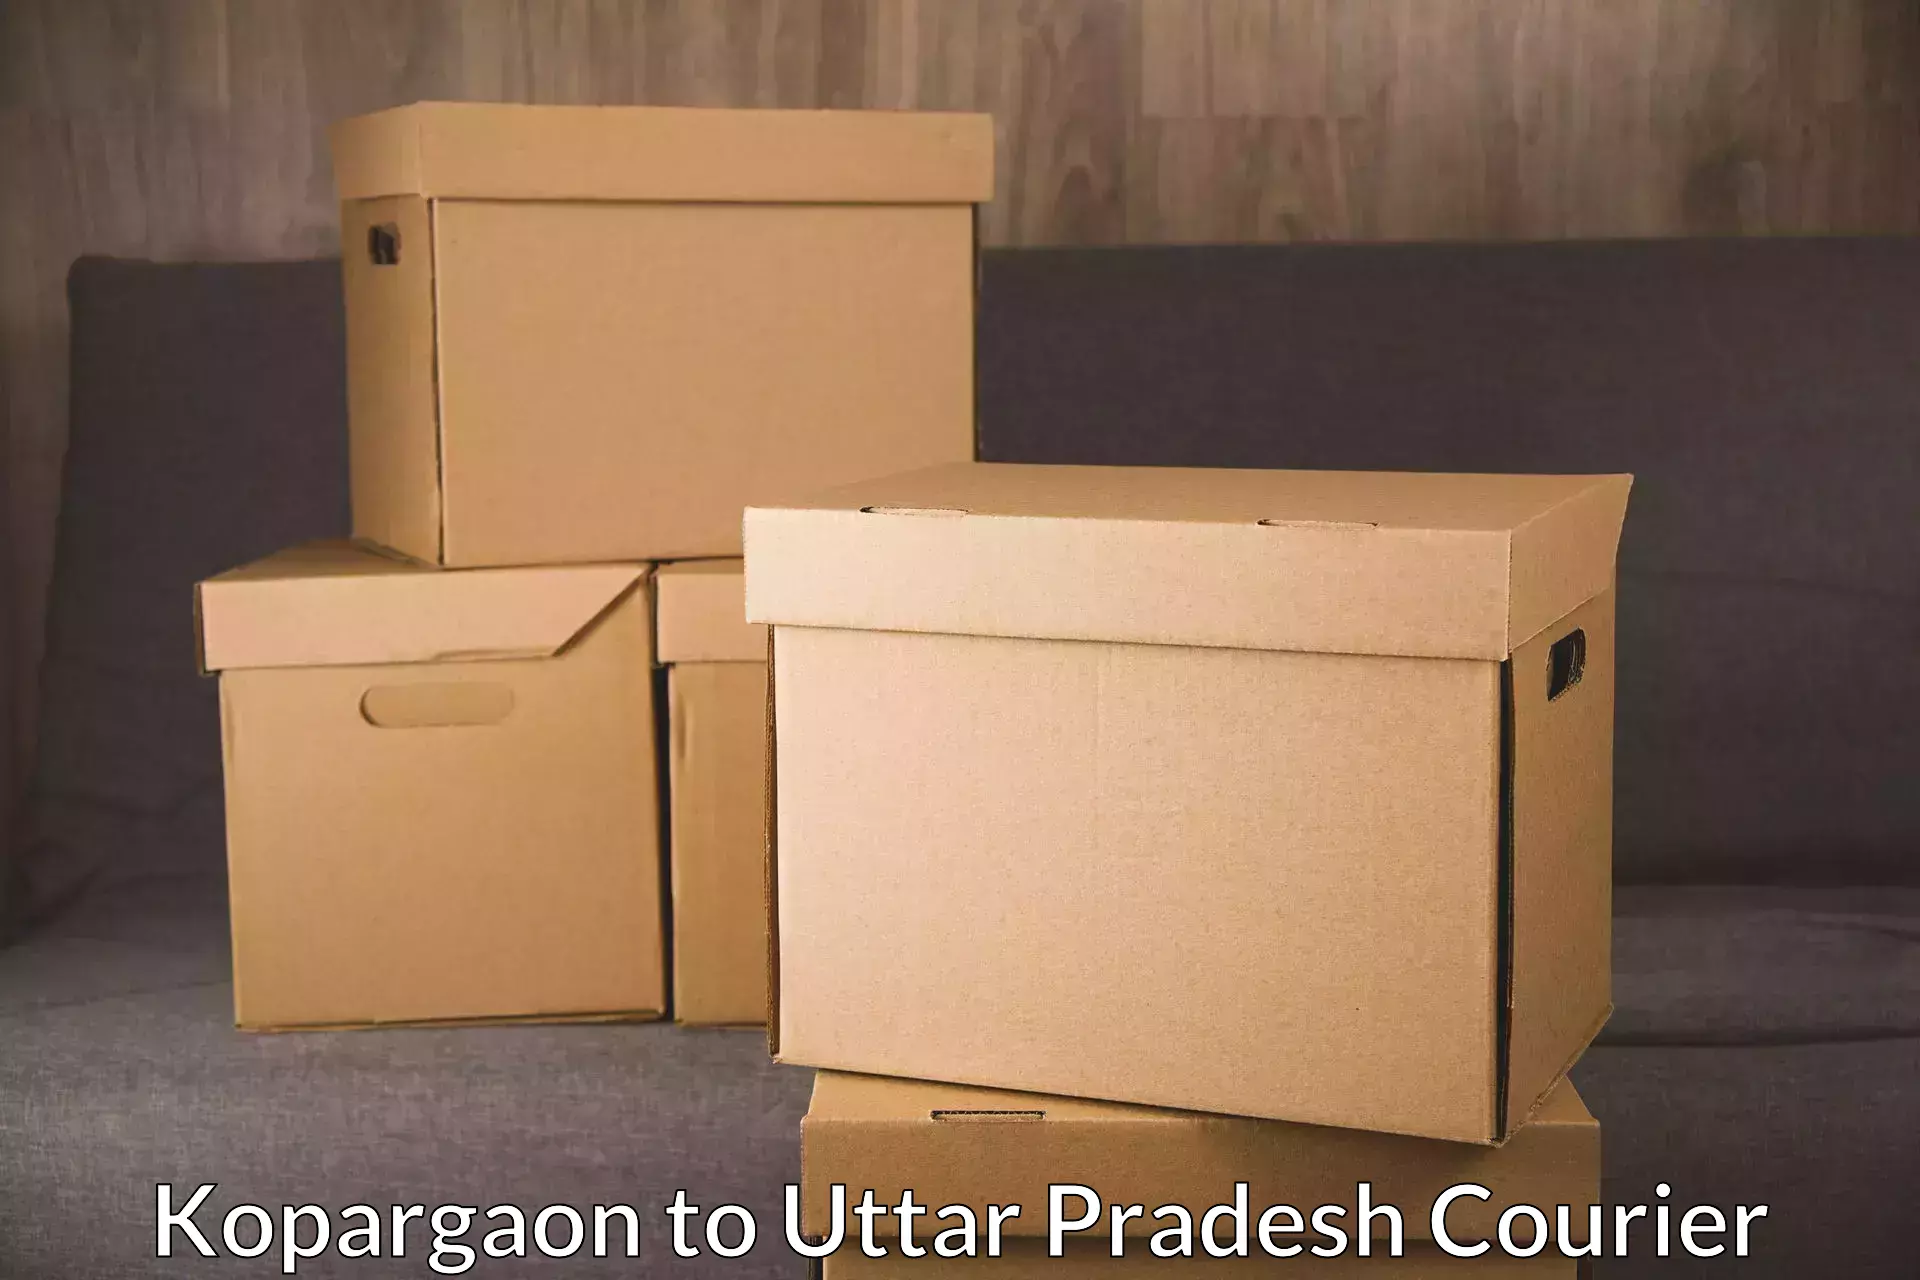 On-call courier service Kopargaon to Bareilly